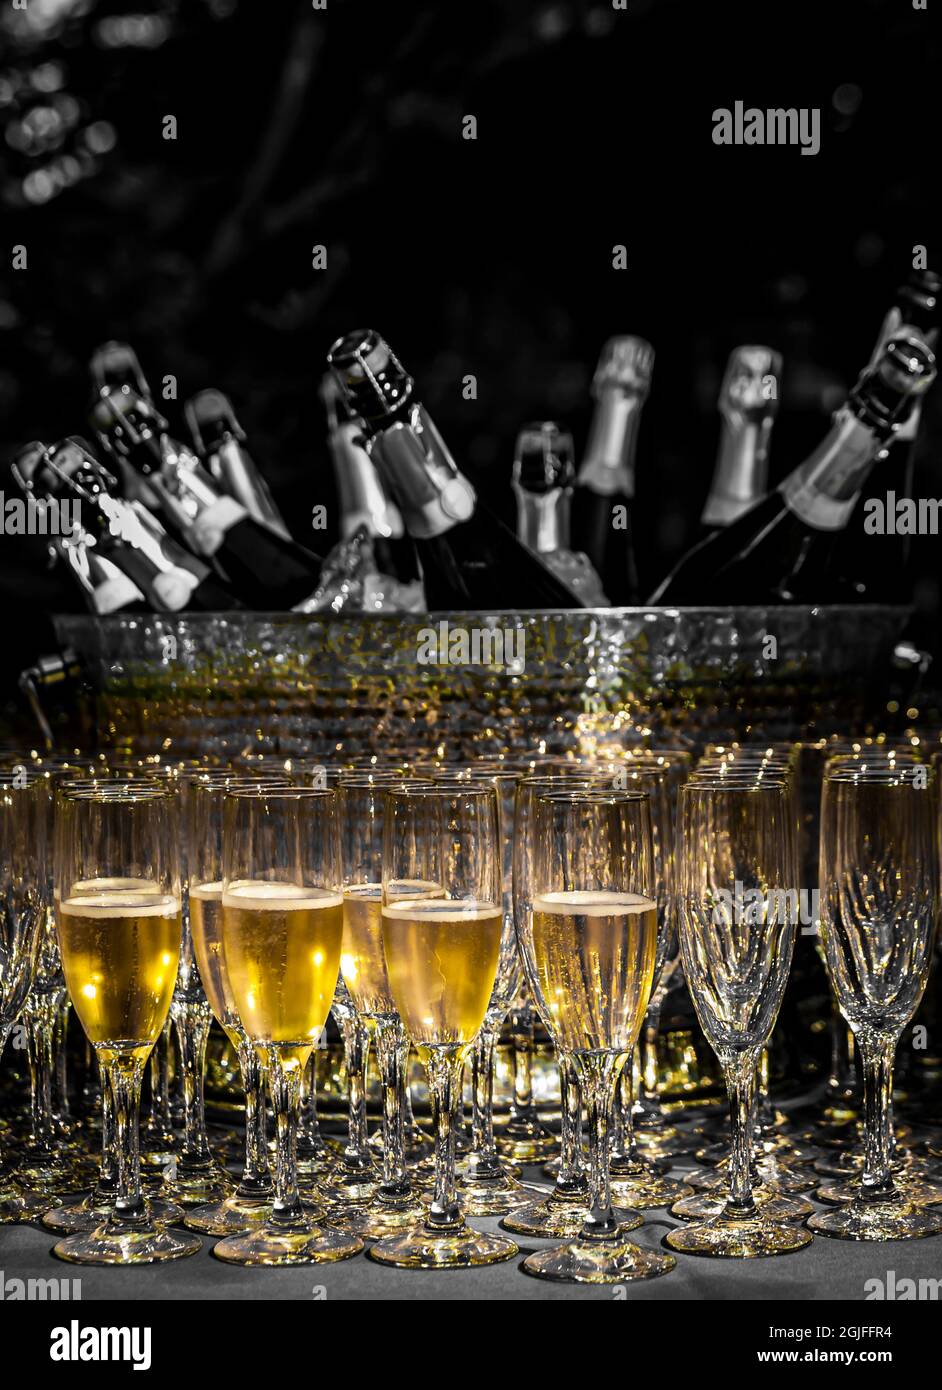 USA, Washington State, Woodinville. Sparkling wine bottles and glasses ready for tasting at a wine event. Stock Photo